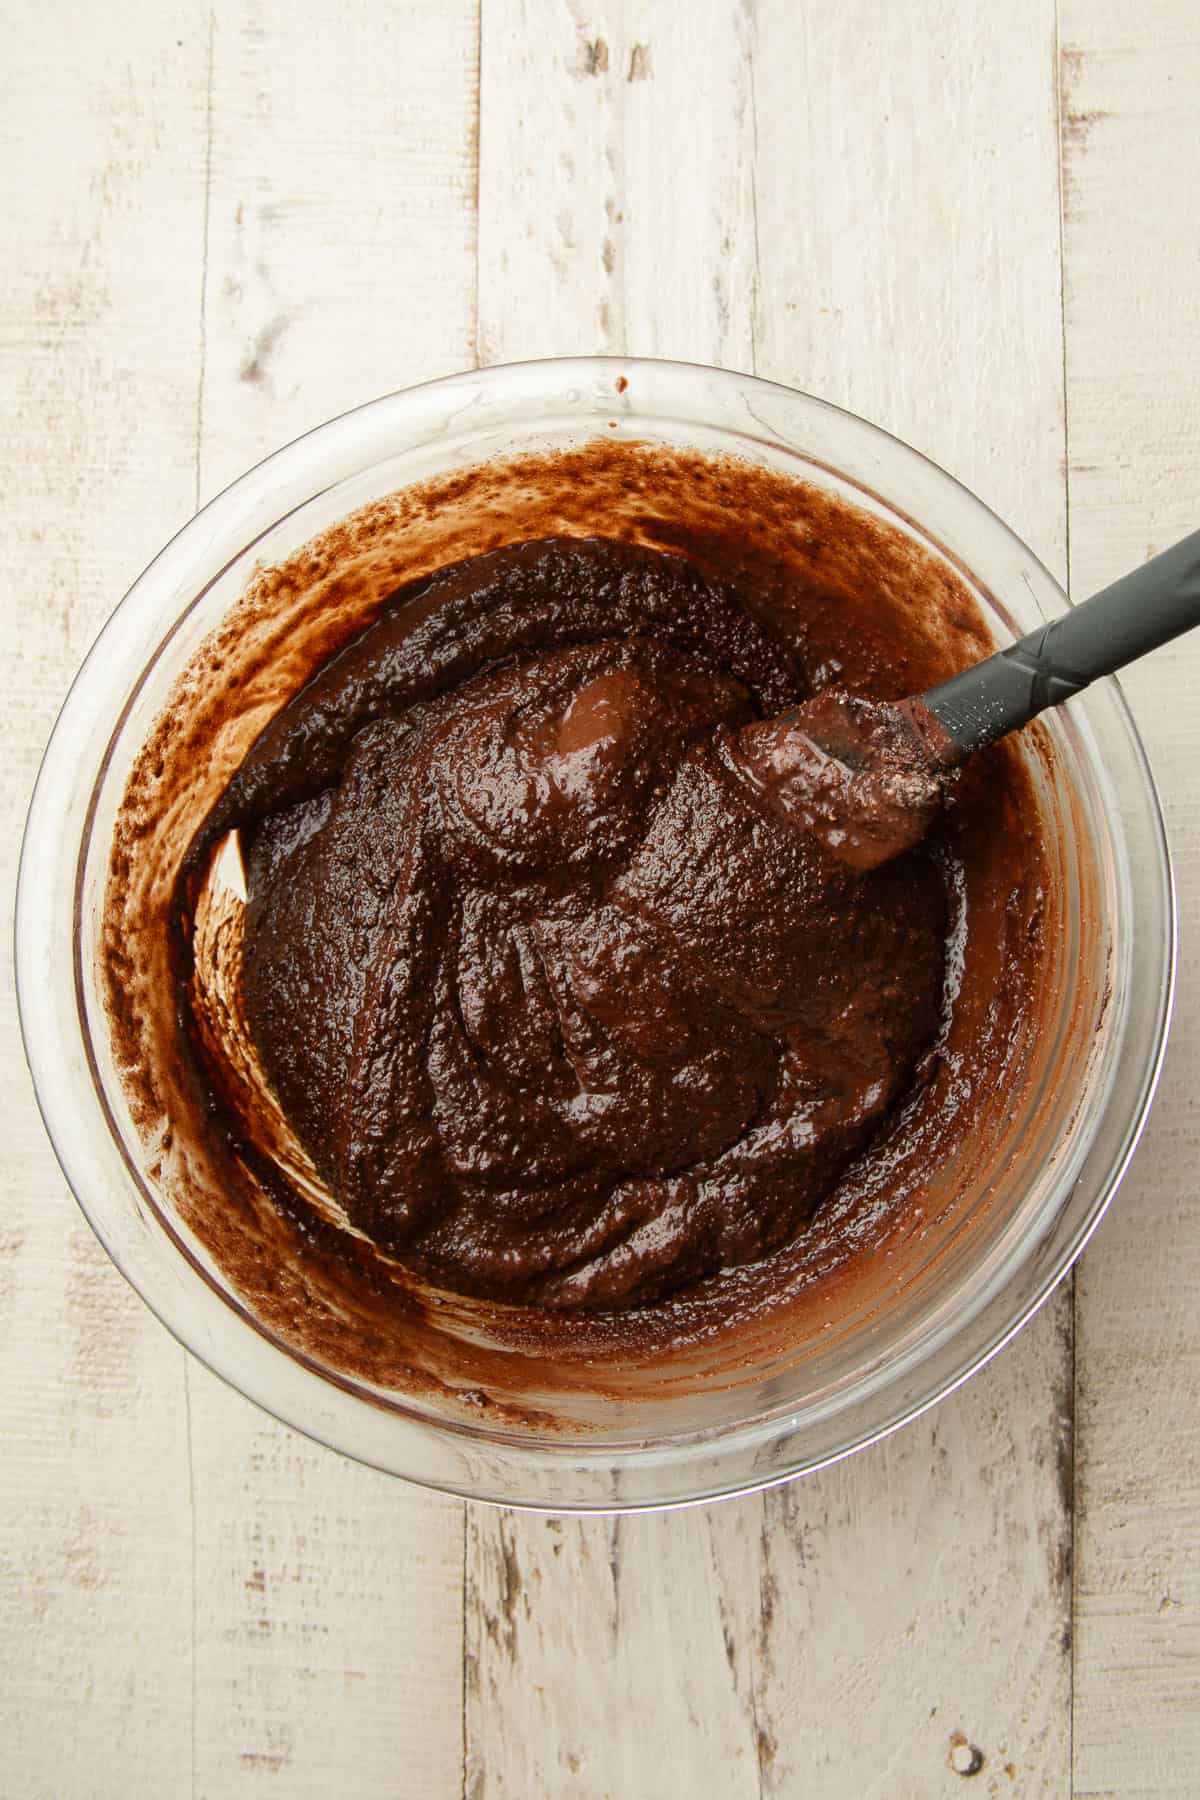 Mix of chocolate, almond flour and wet ingredients for vegan torte batter in a mixing bowl.